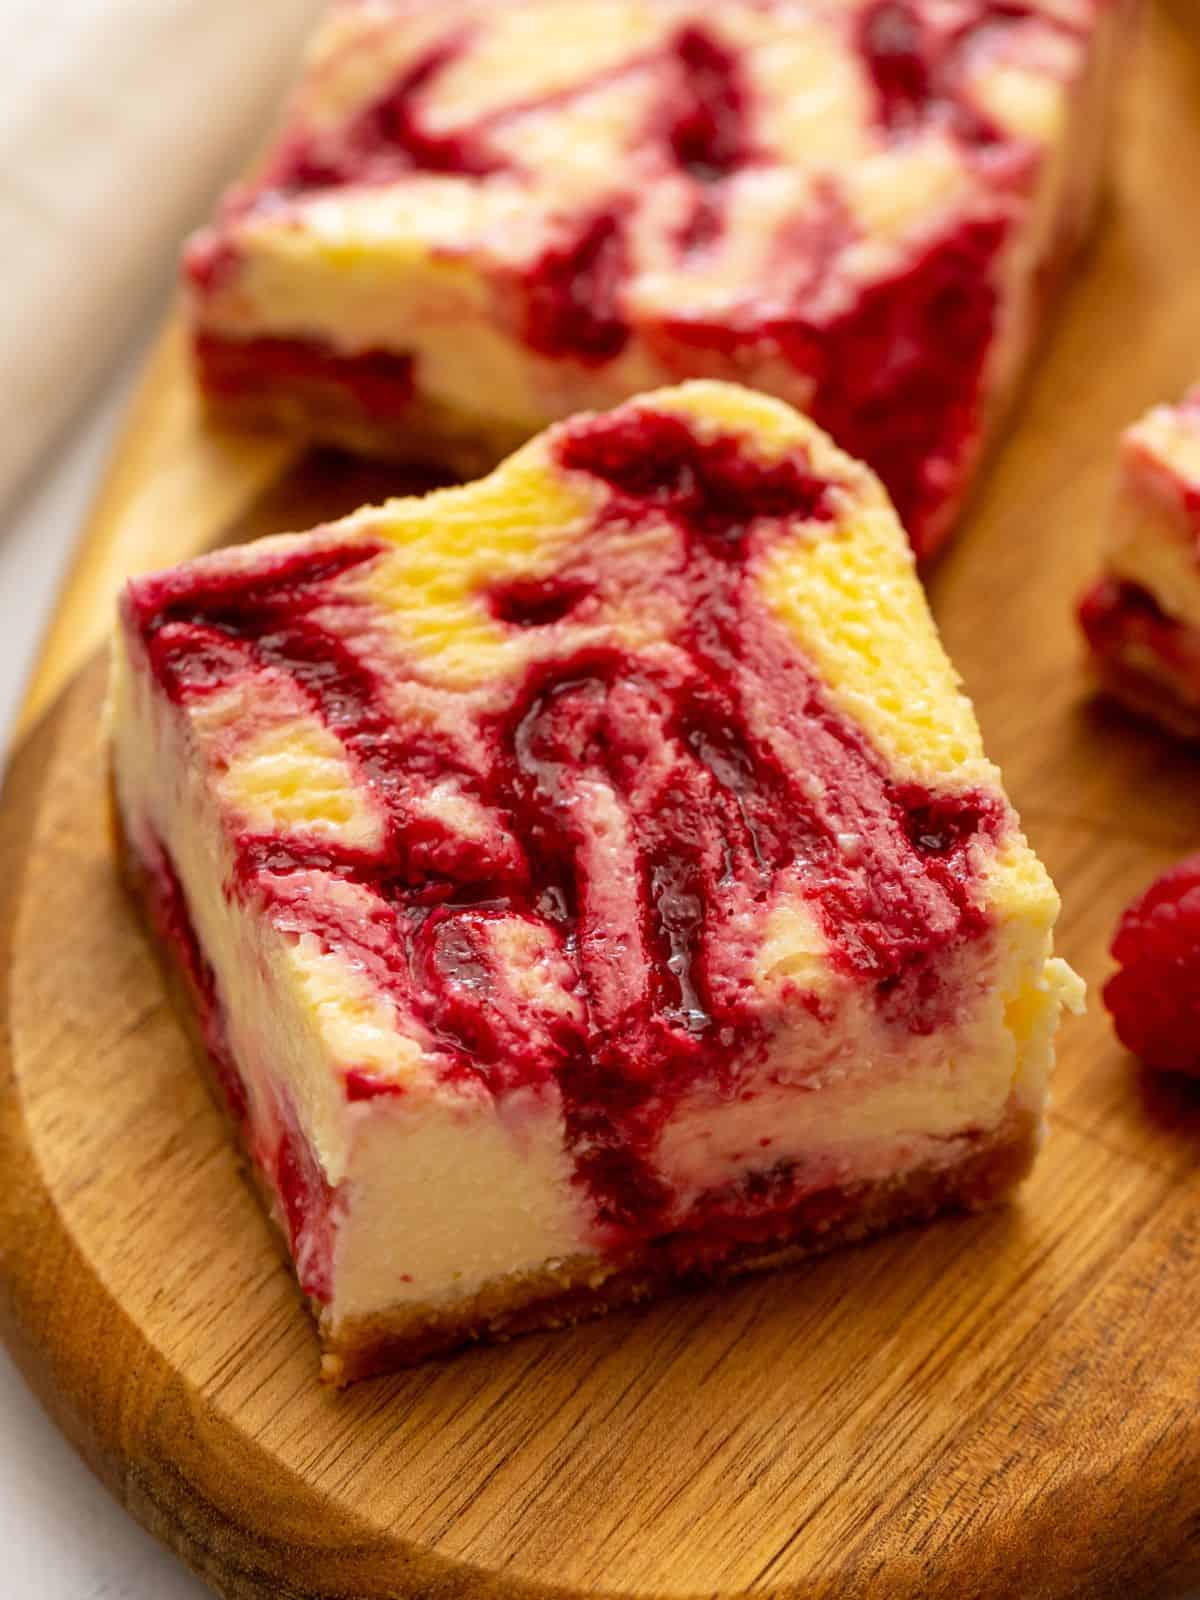 Sliced cheesecake bars on wooden cutting board revealing the raspberry swirl throughout the cheesecake batter.